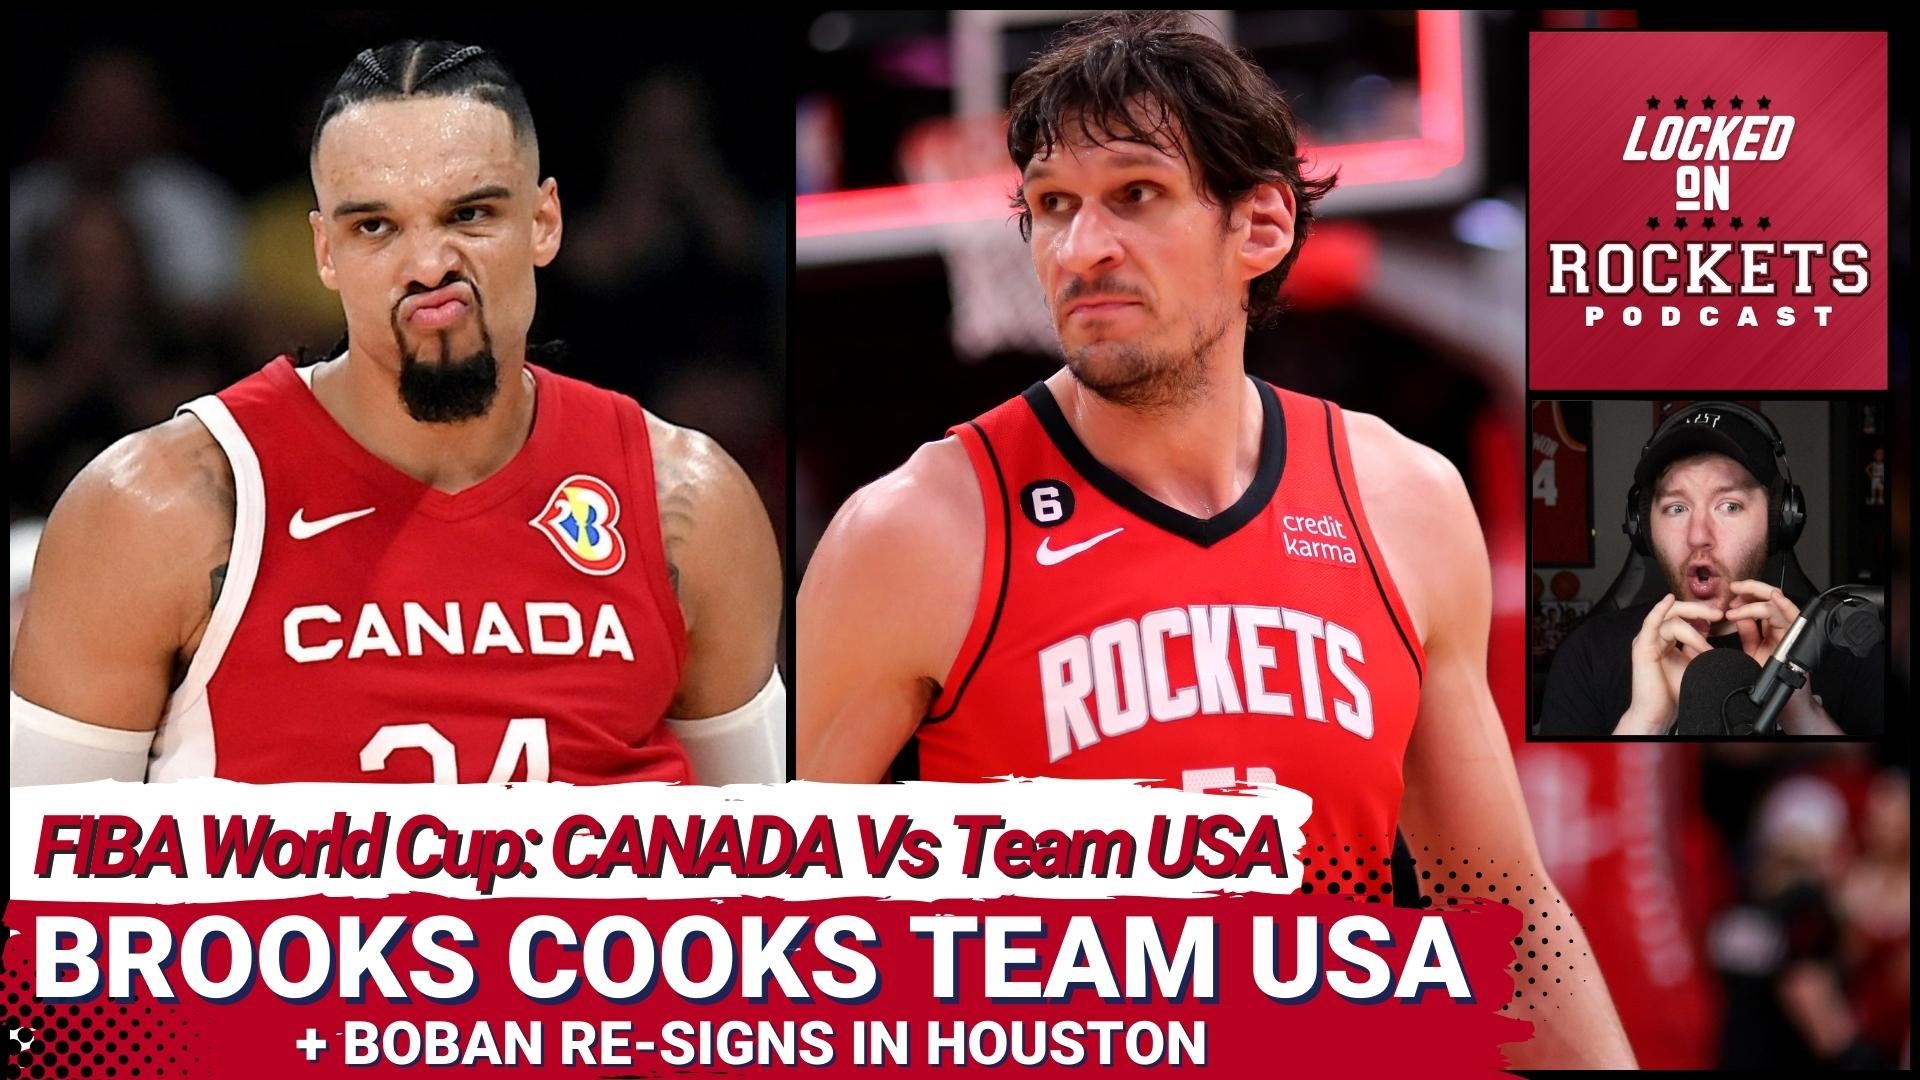 Host Jackson Gatlin discusses Dillon Brooks cooking Team USA, Boban Marjanovic re-signing with the Houston Rockets, season awards betting odds and more.